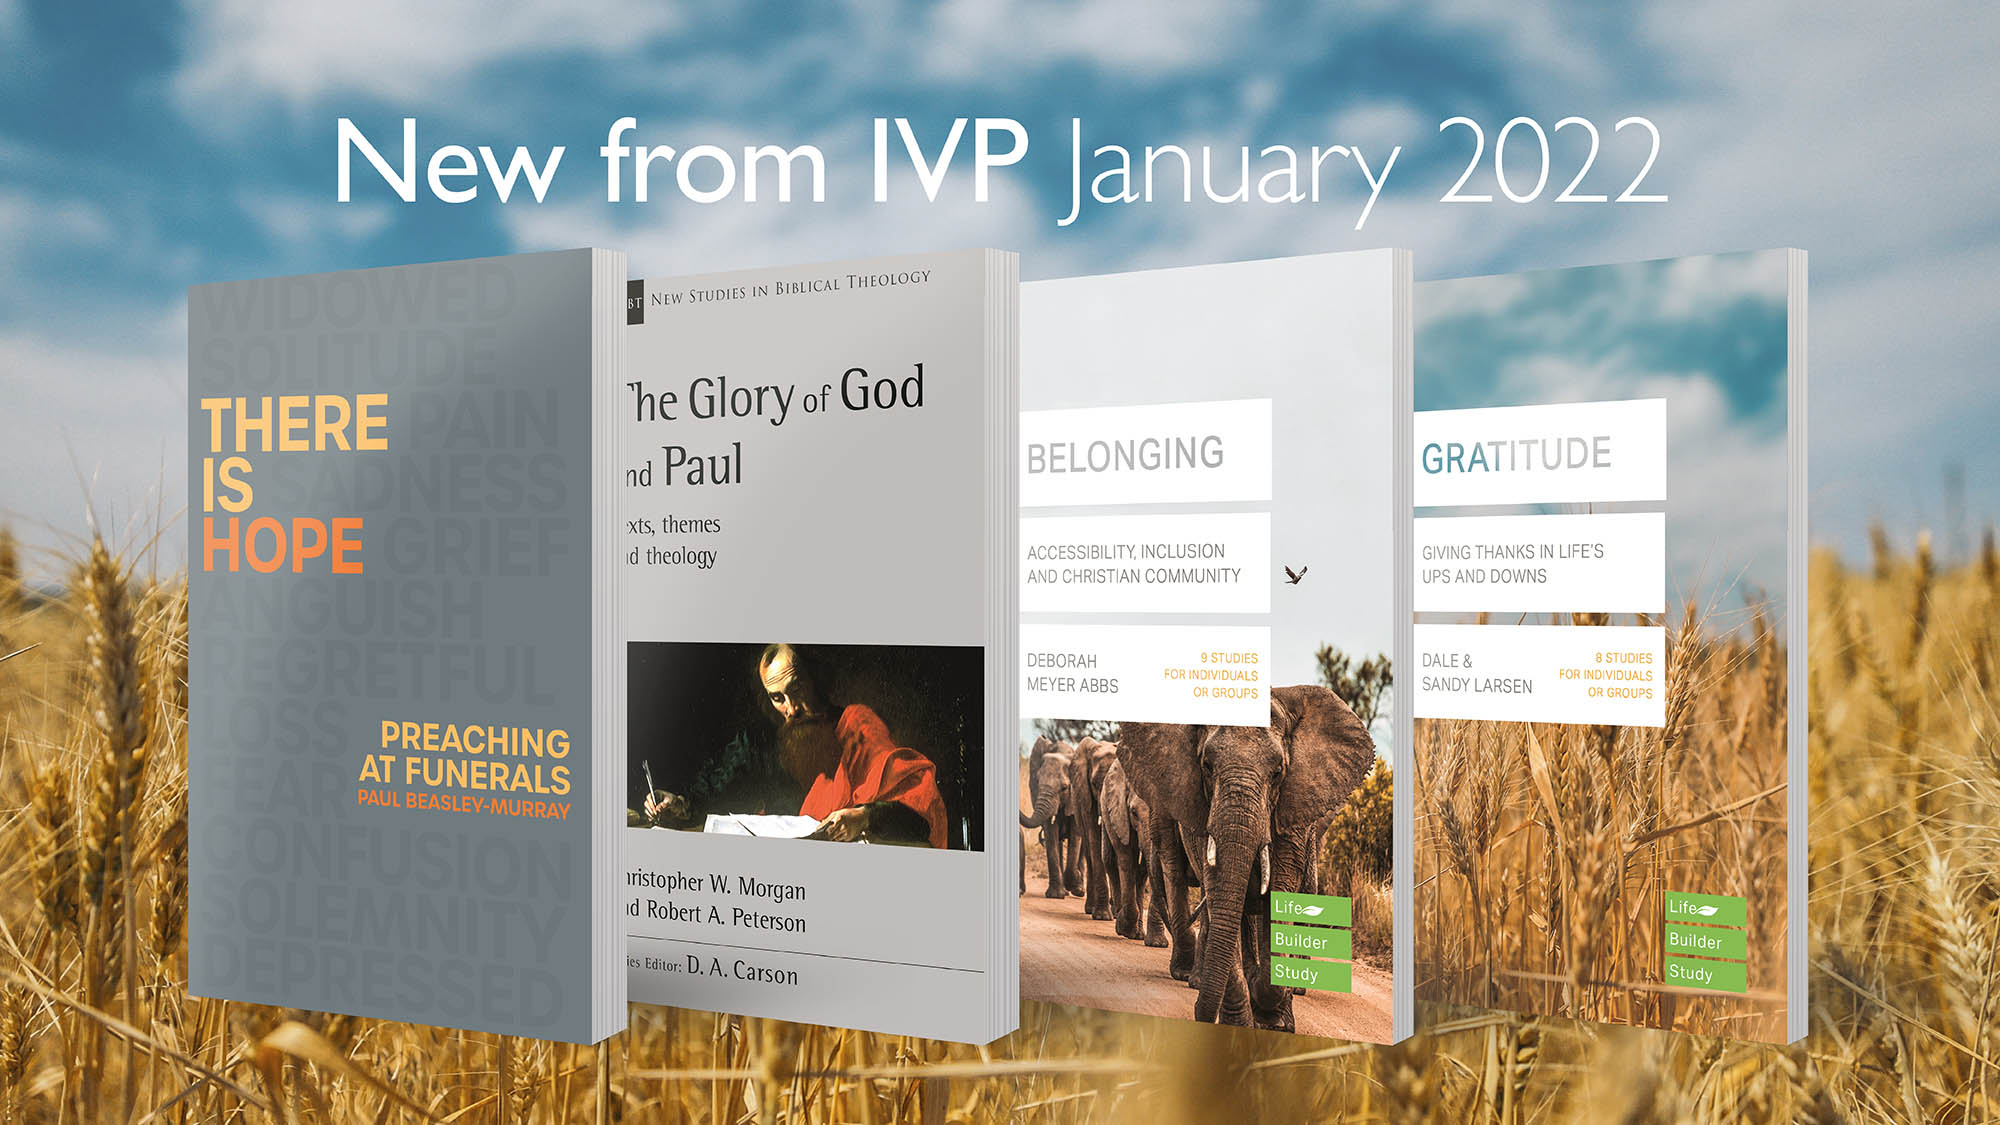 The IVP January 2022 Releases*